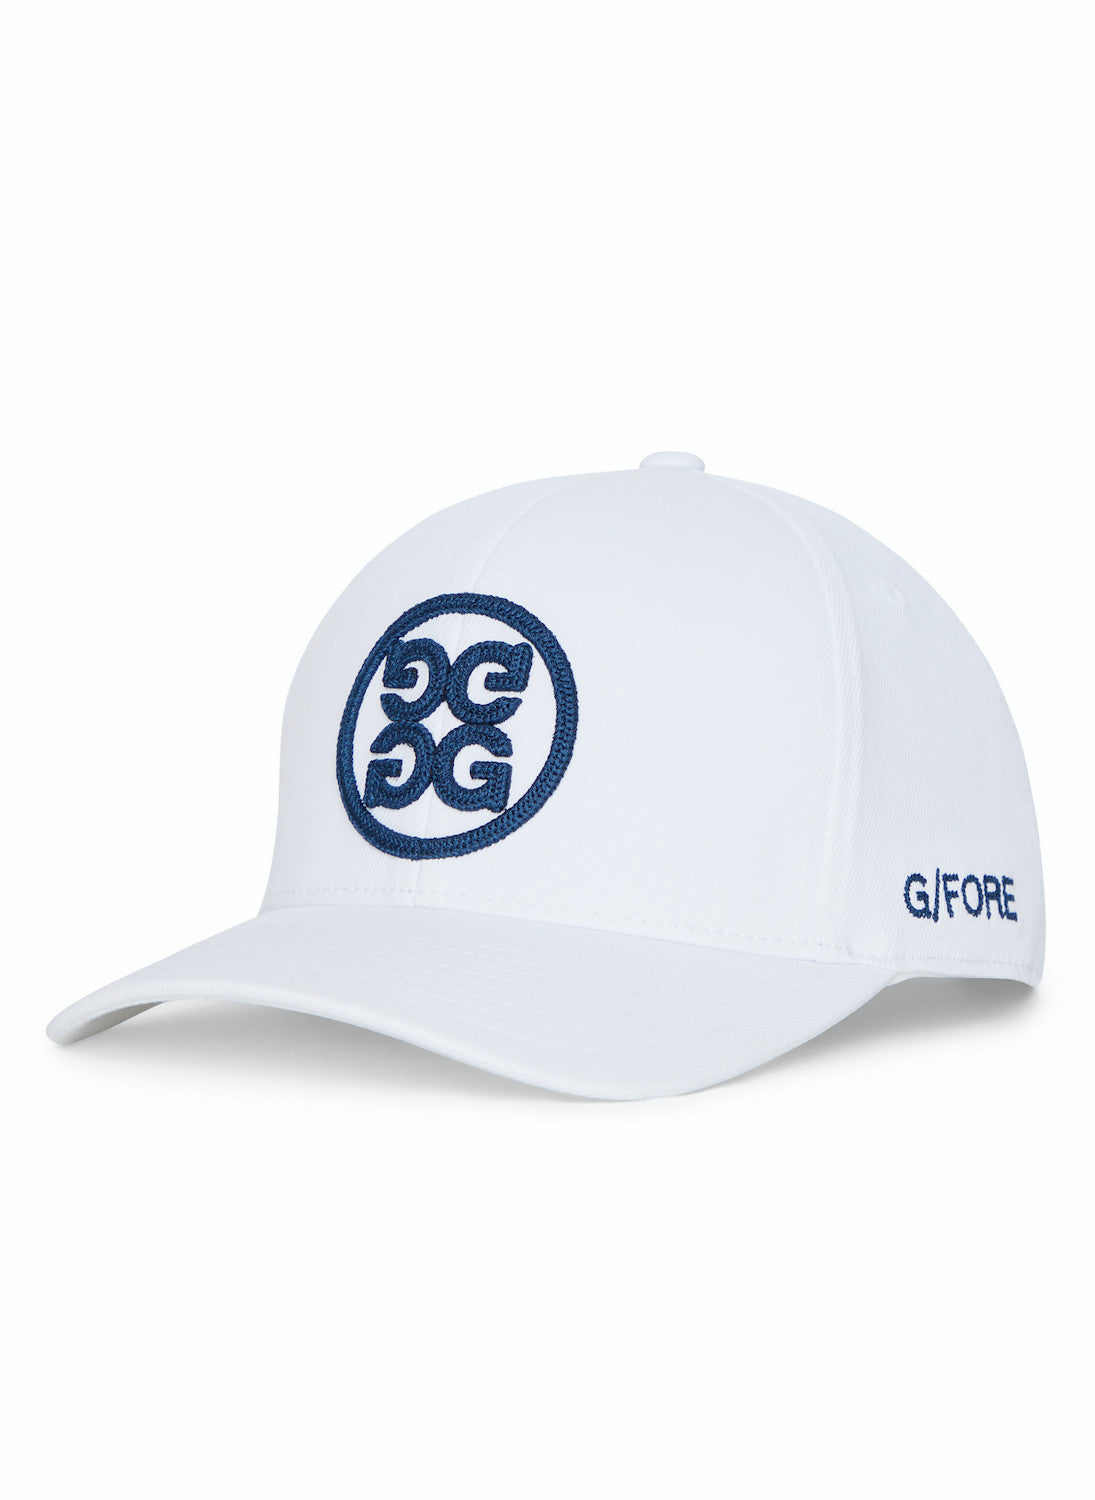 G/Fore Circle G's Stretch Twill Snapback Hat